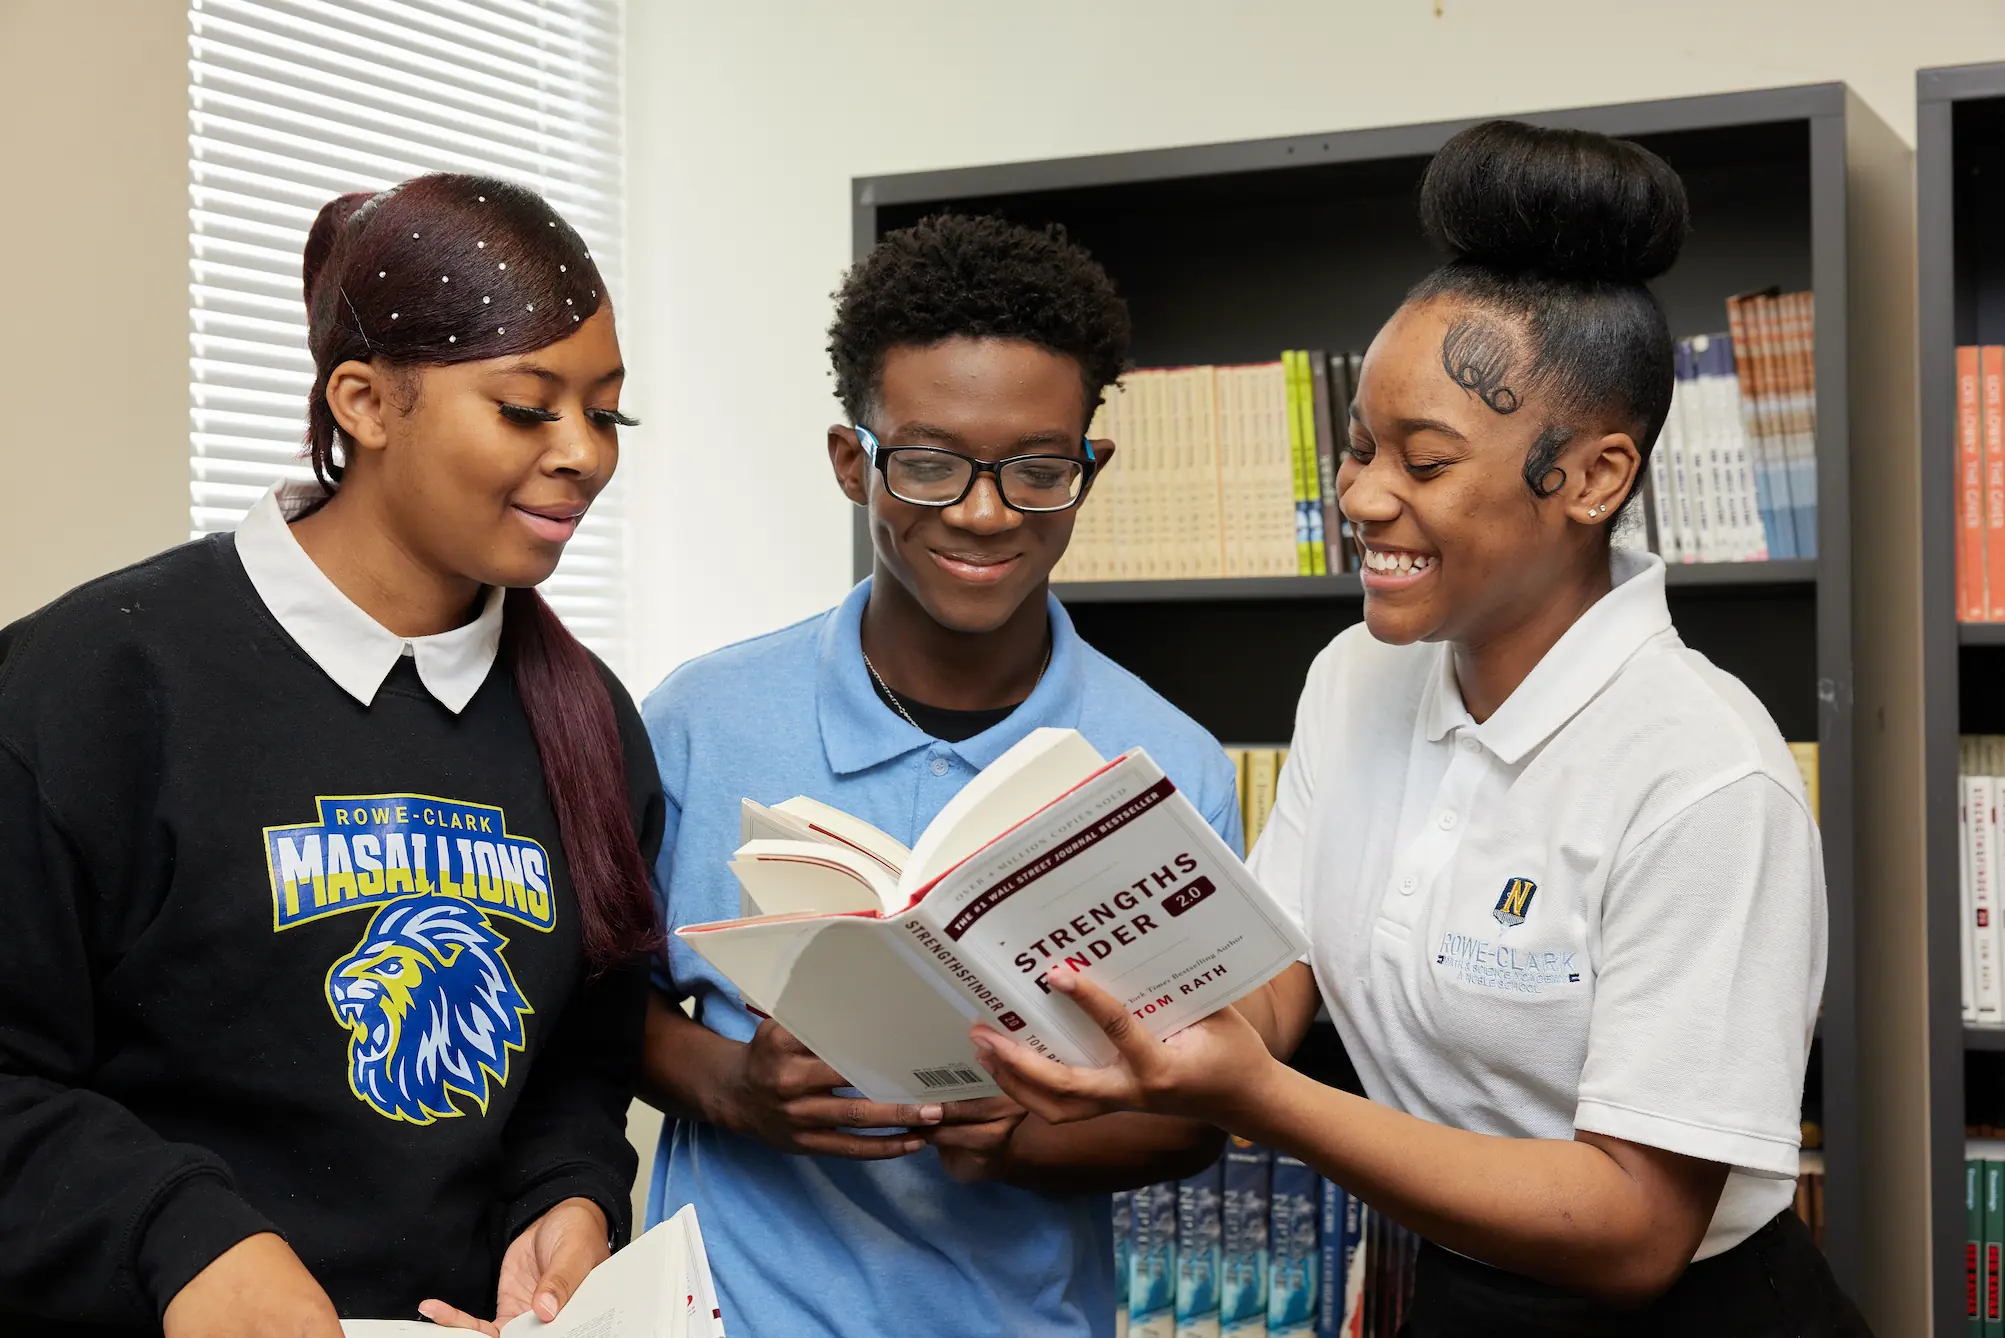 Group Of Students holding a book and smiling